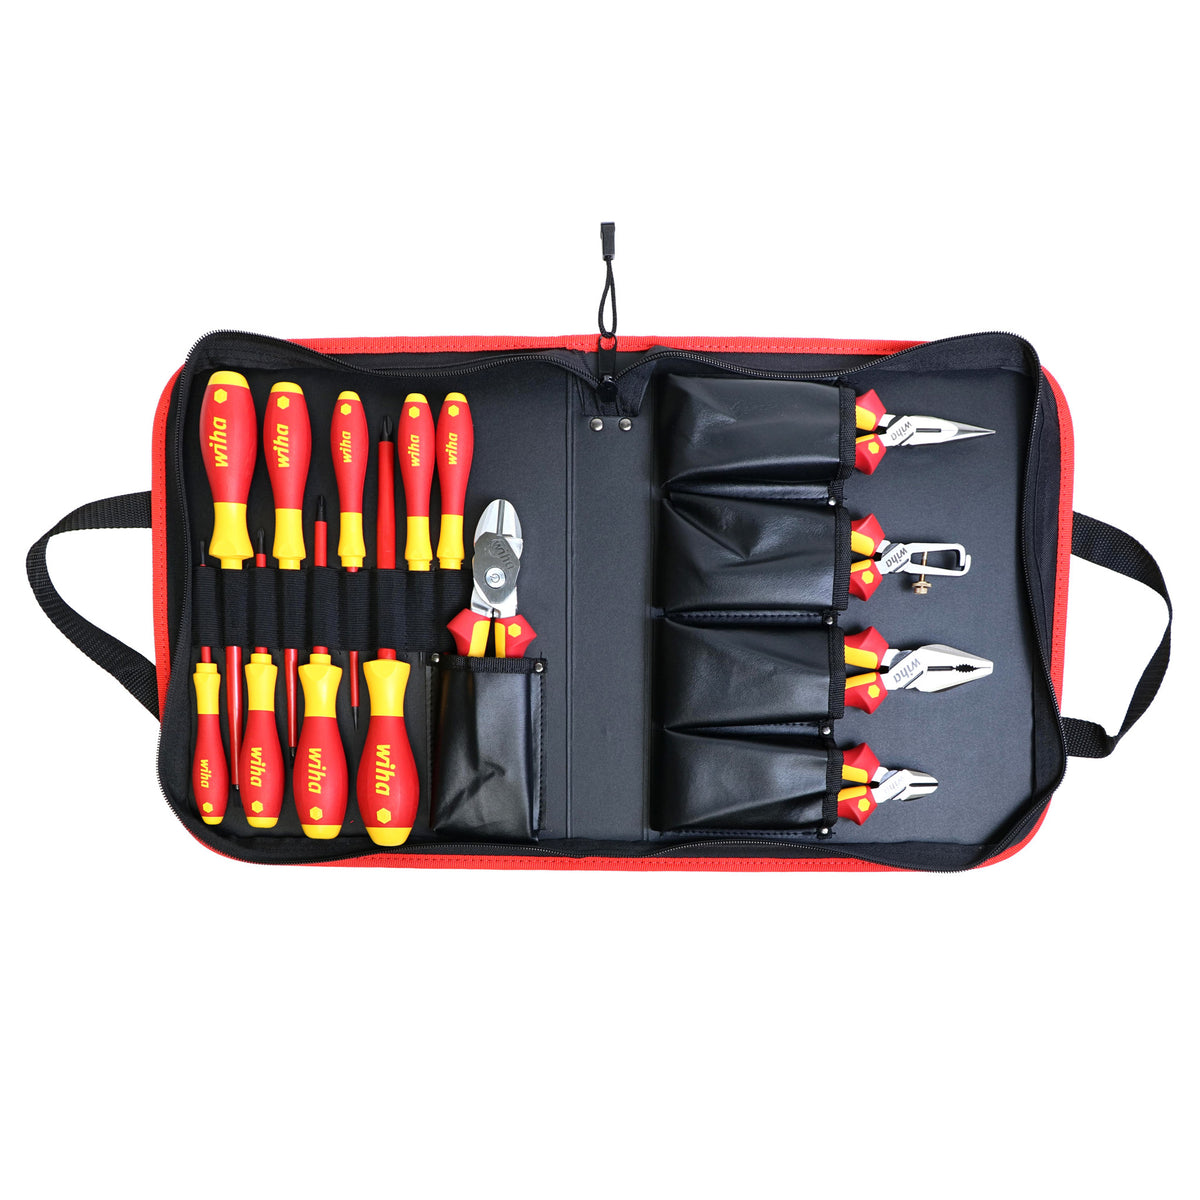 Wiha 32895 14 Piece Insulated Pliers-Cutters and Screwdriver Set